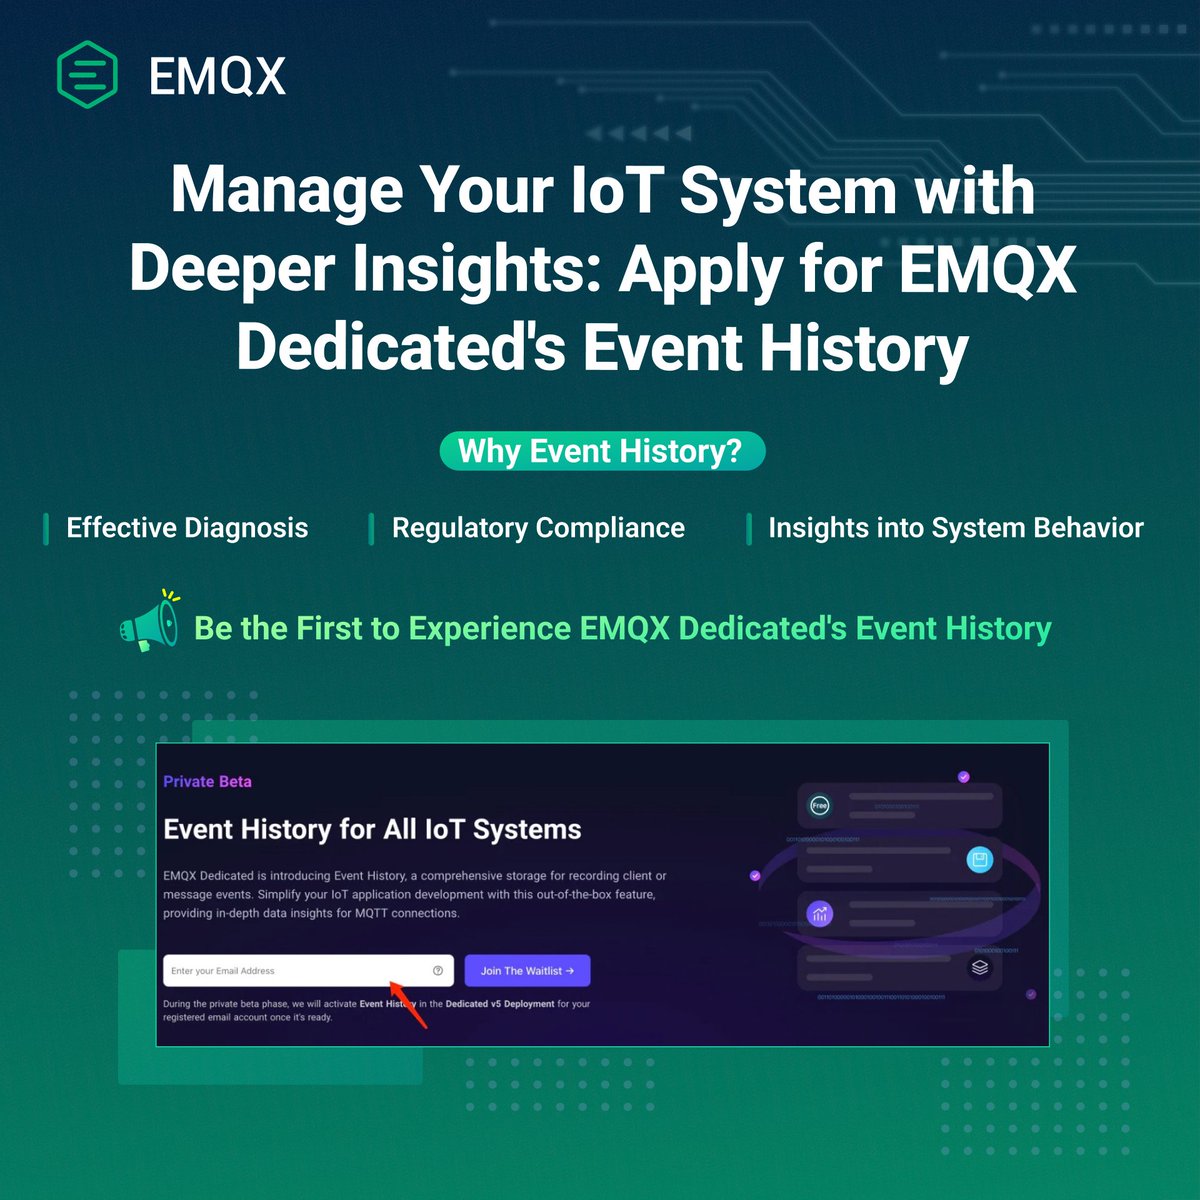 🎉 Exciting news! EMQX Dedicated v5 will soon introduce #EventHistory, offering an out-of-the-box method to observe and analyze device behavior over time. 🚀 Gain in-depth data insights, troubleshoot efficiently. #MQTT Join private beta testing now! ⬇️ social.emqx.com/u/l3ja2h